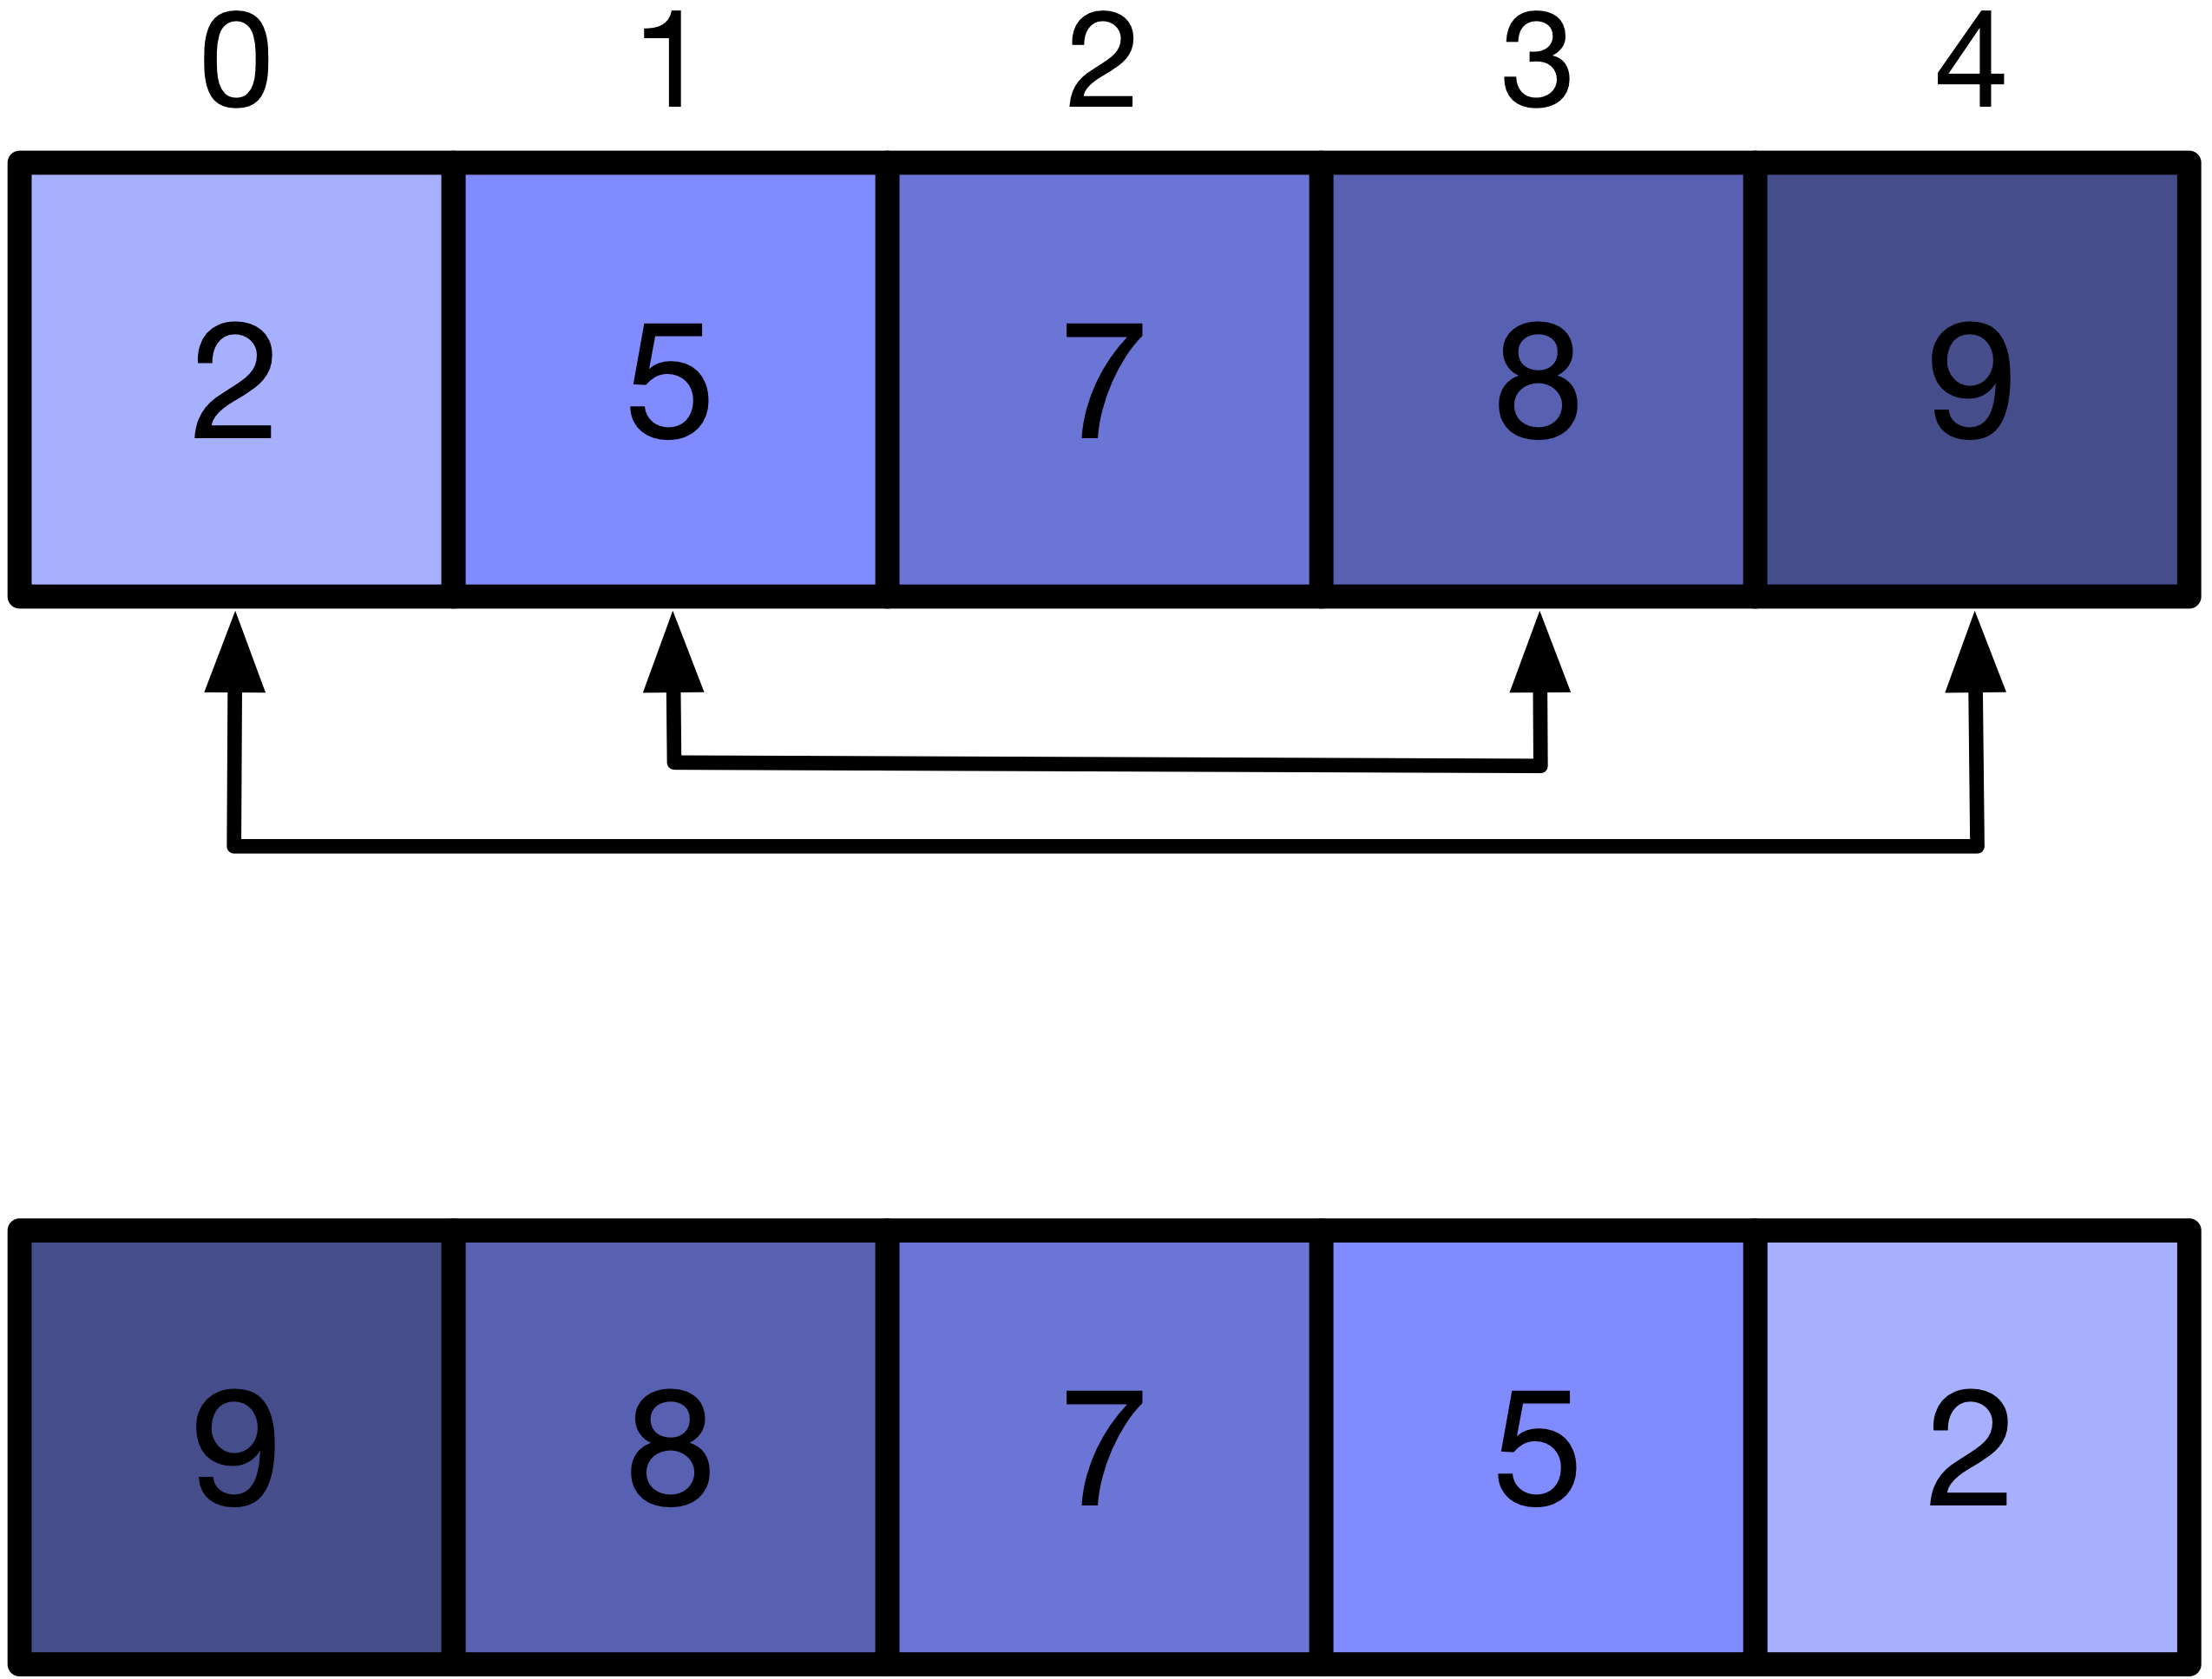 Array before and after reversing.